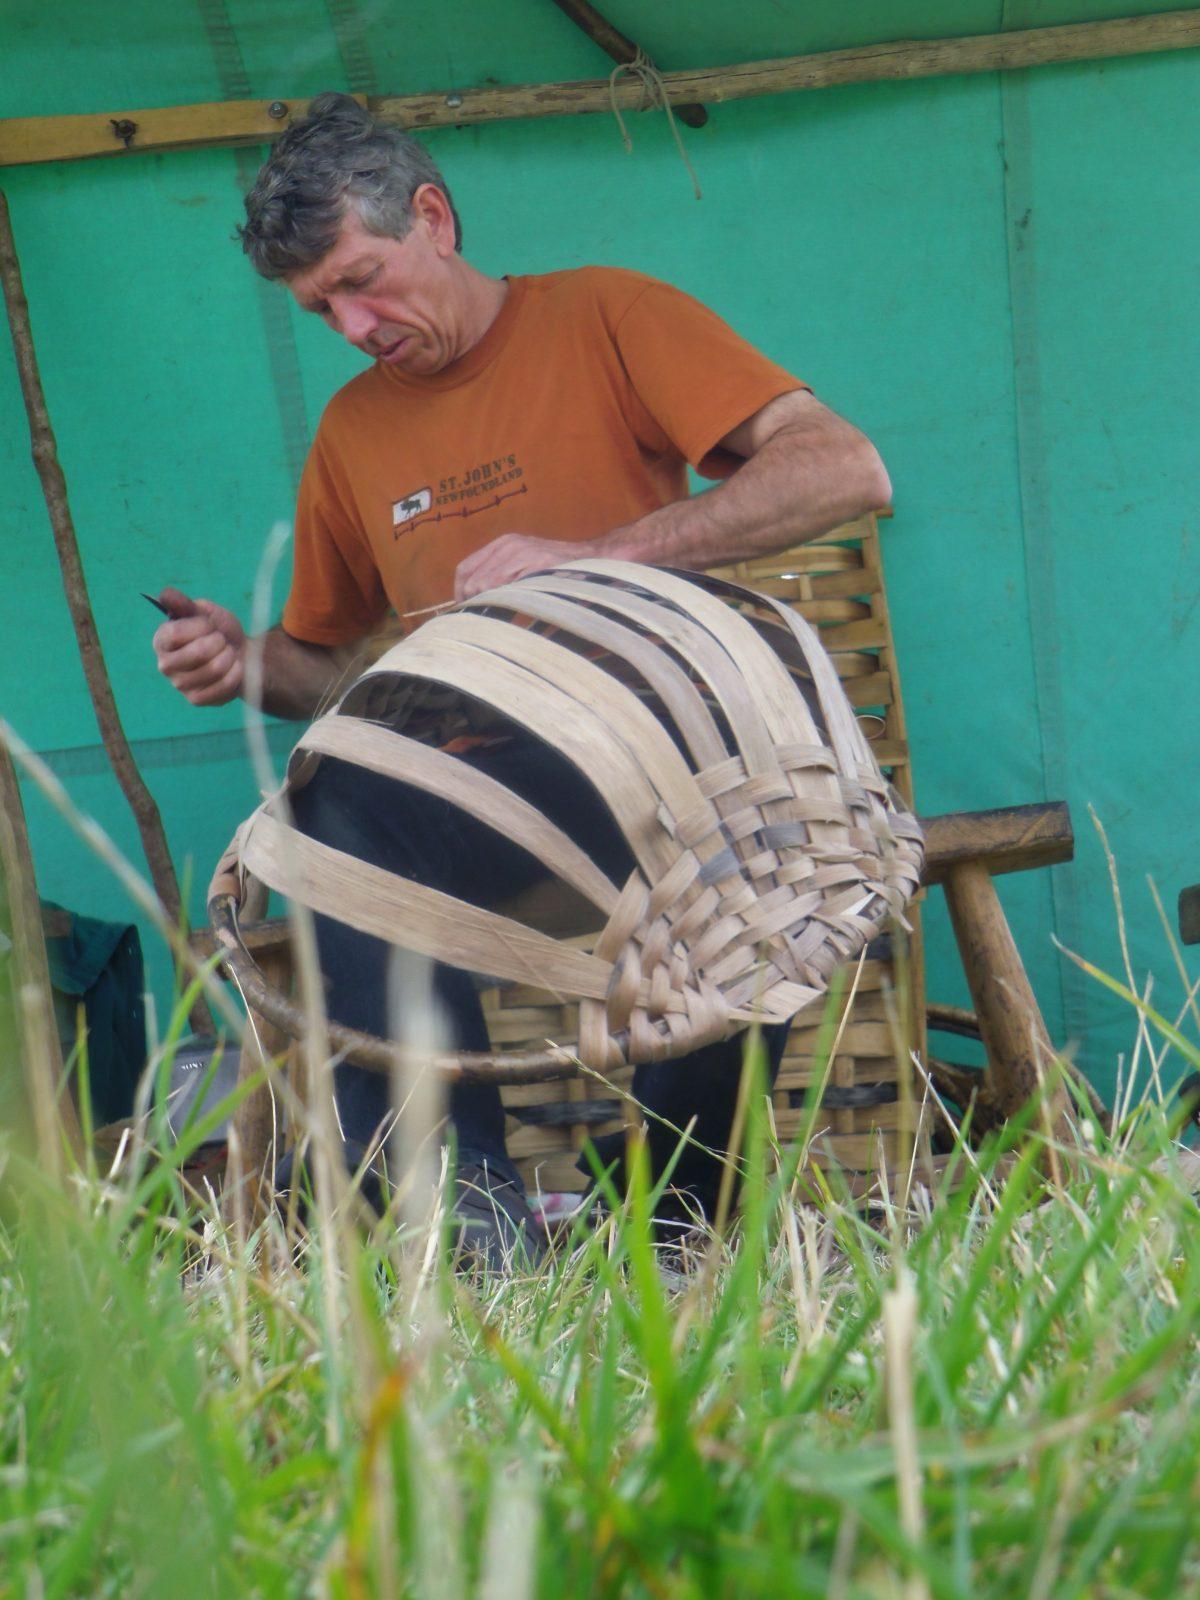 Oak swill basket maker Owen Jones. Swill basket making is at risk of being lost and is considered a critically endangered craft. (Robin Wood)